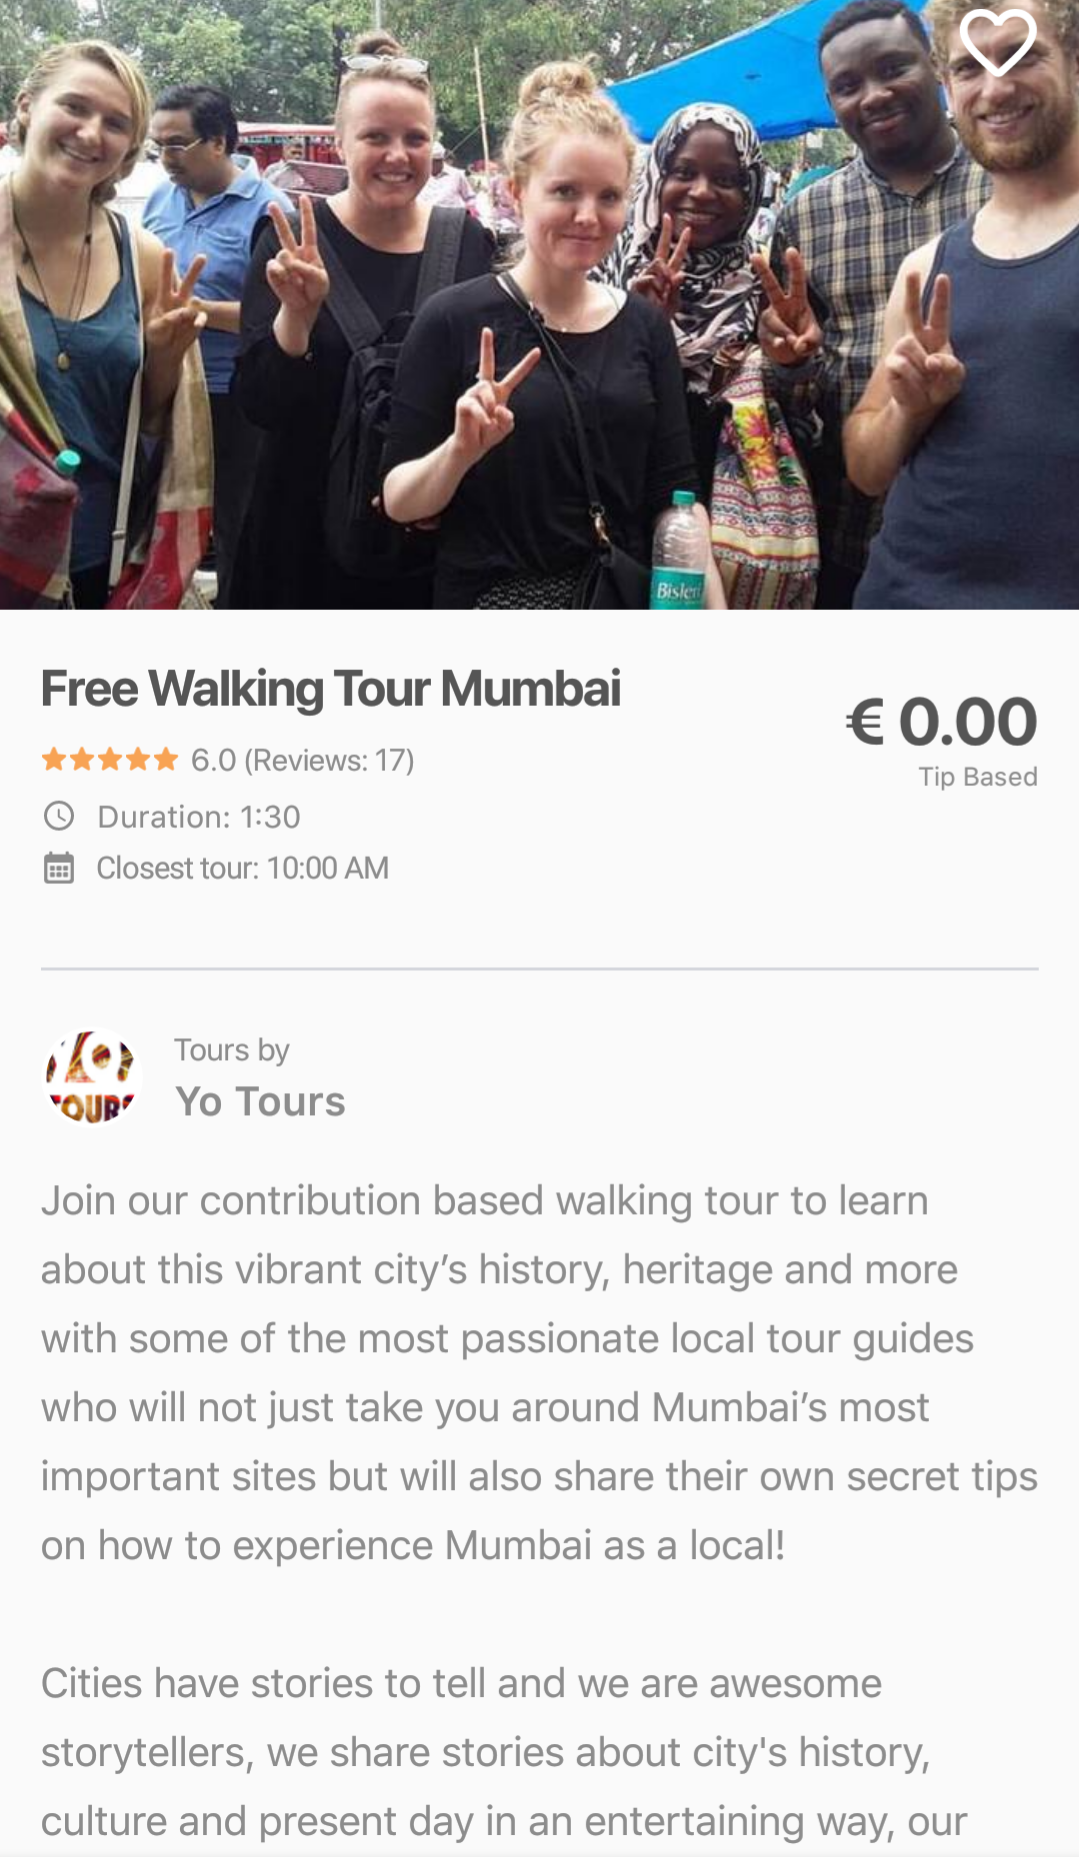 Freetour Finds Free Walking Tours and Budget Activities